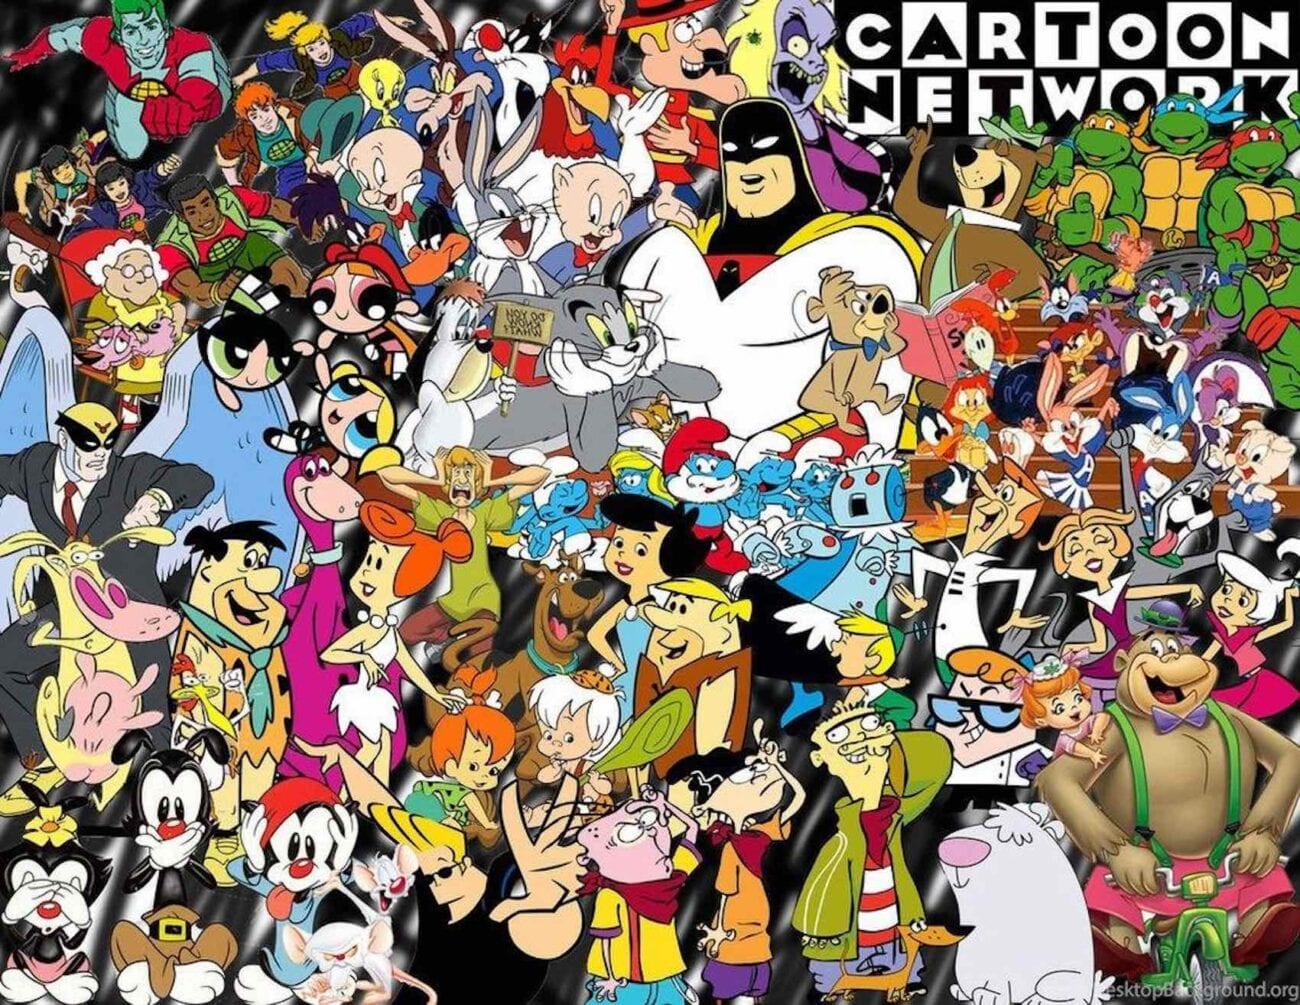 Cartoon Network shows from the 2000s hold a special place in the hearts of millennials. Here are some of the best shows from that era.